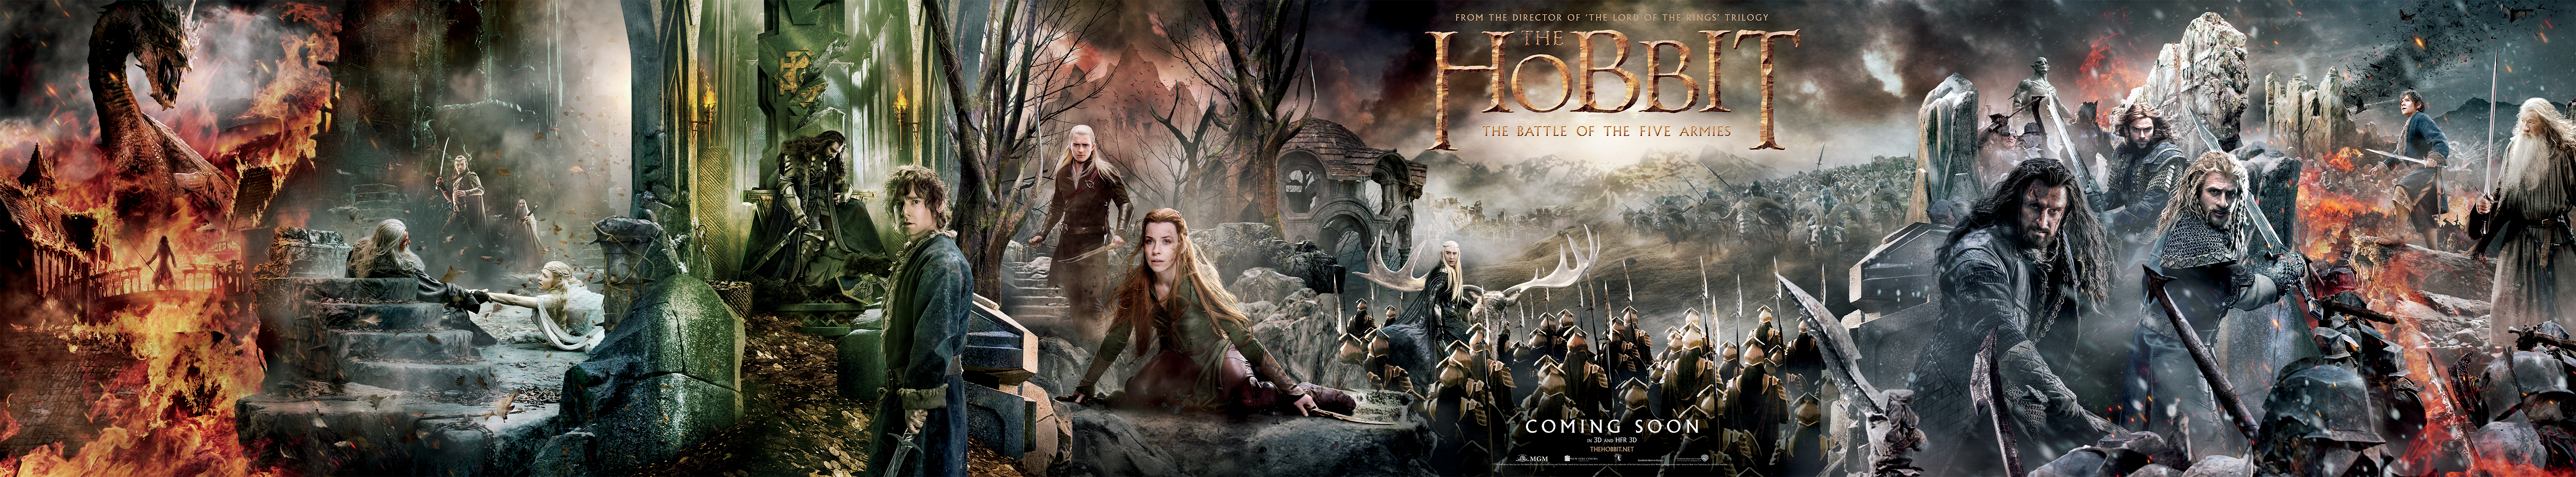 Movie The Hobbit The Battle Of The Five Armies 5914x1096